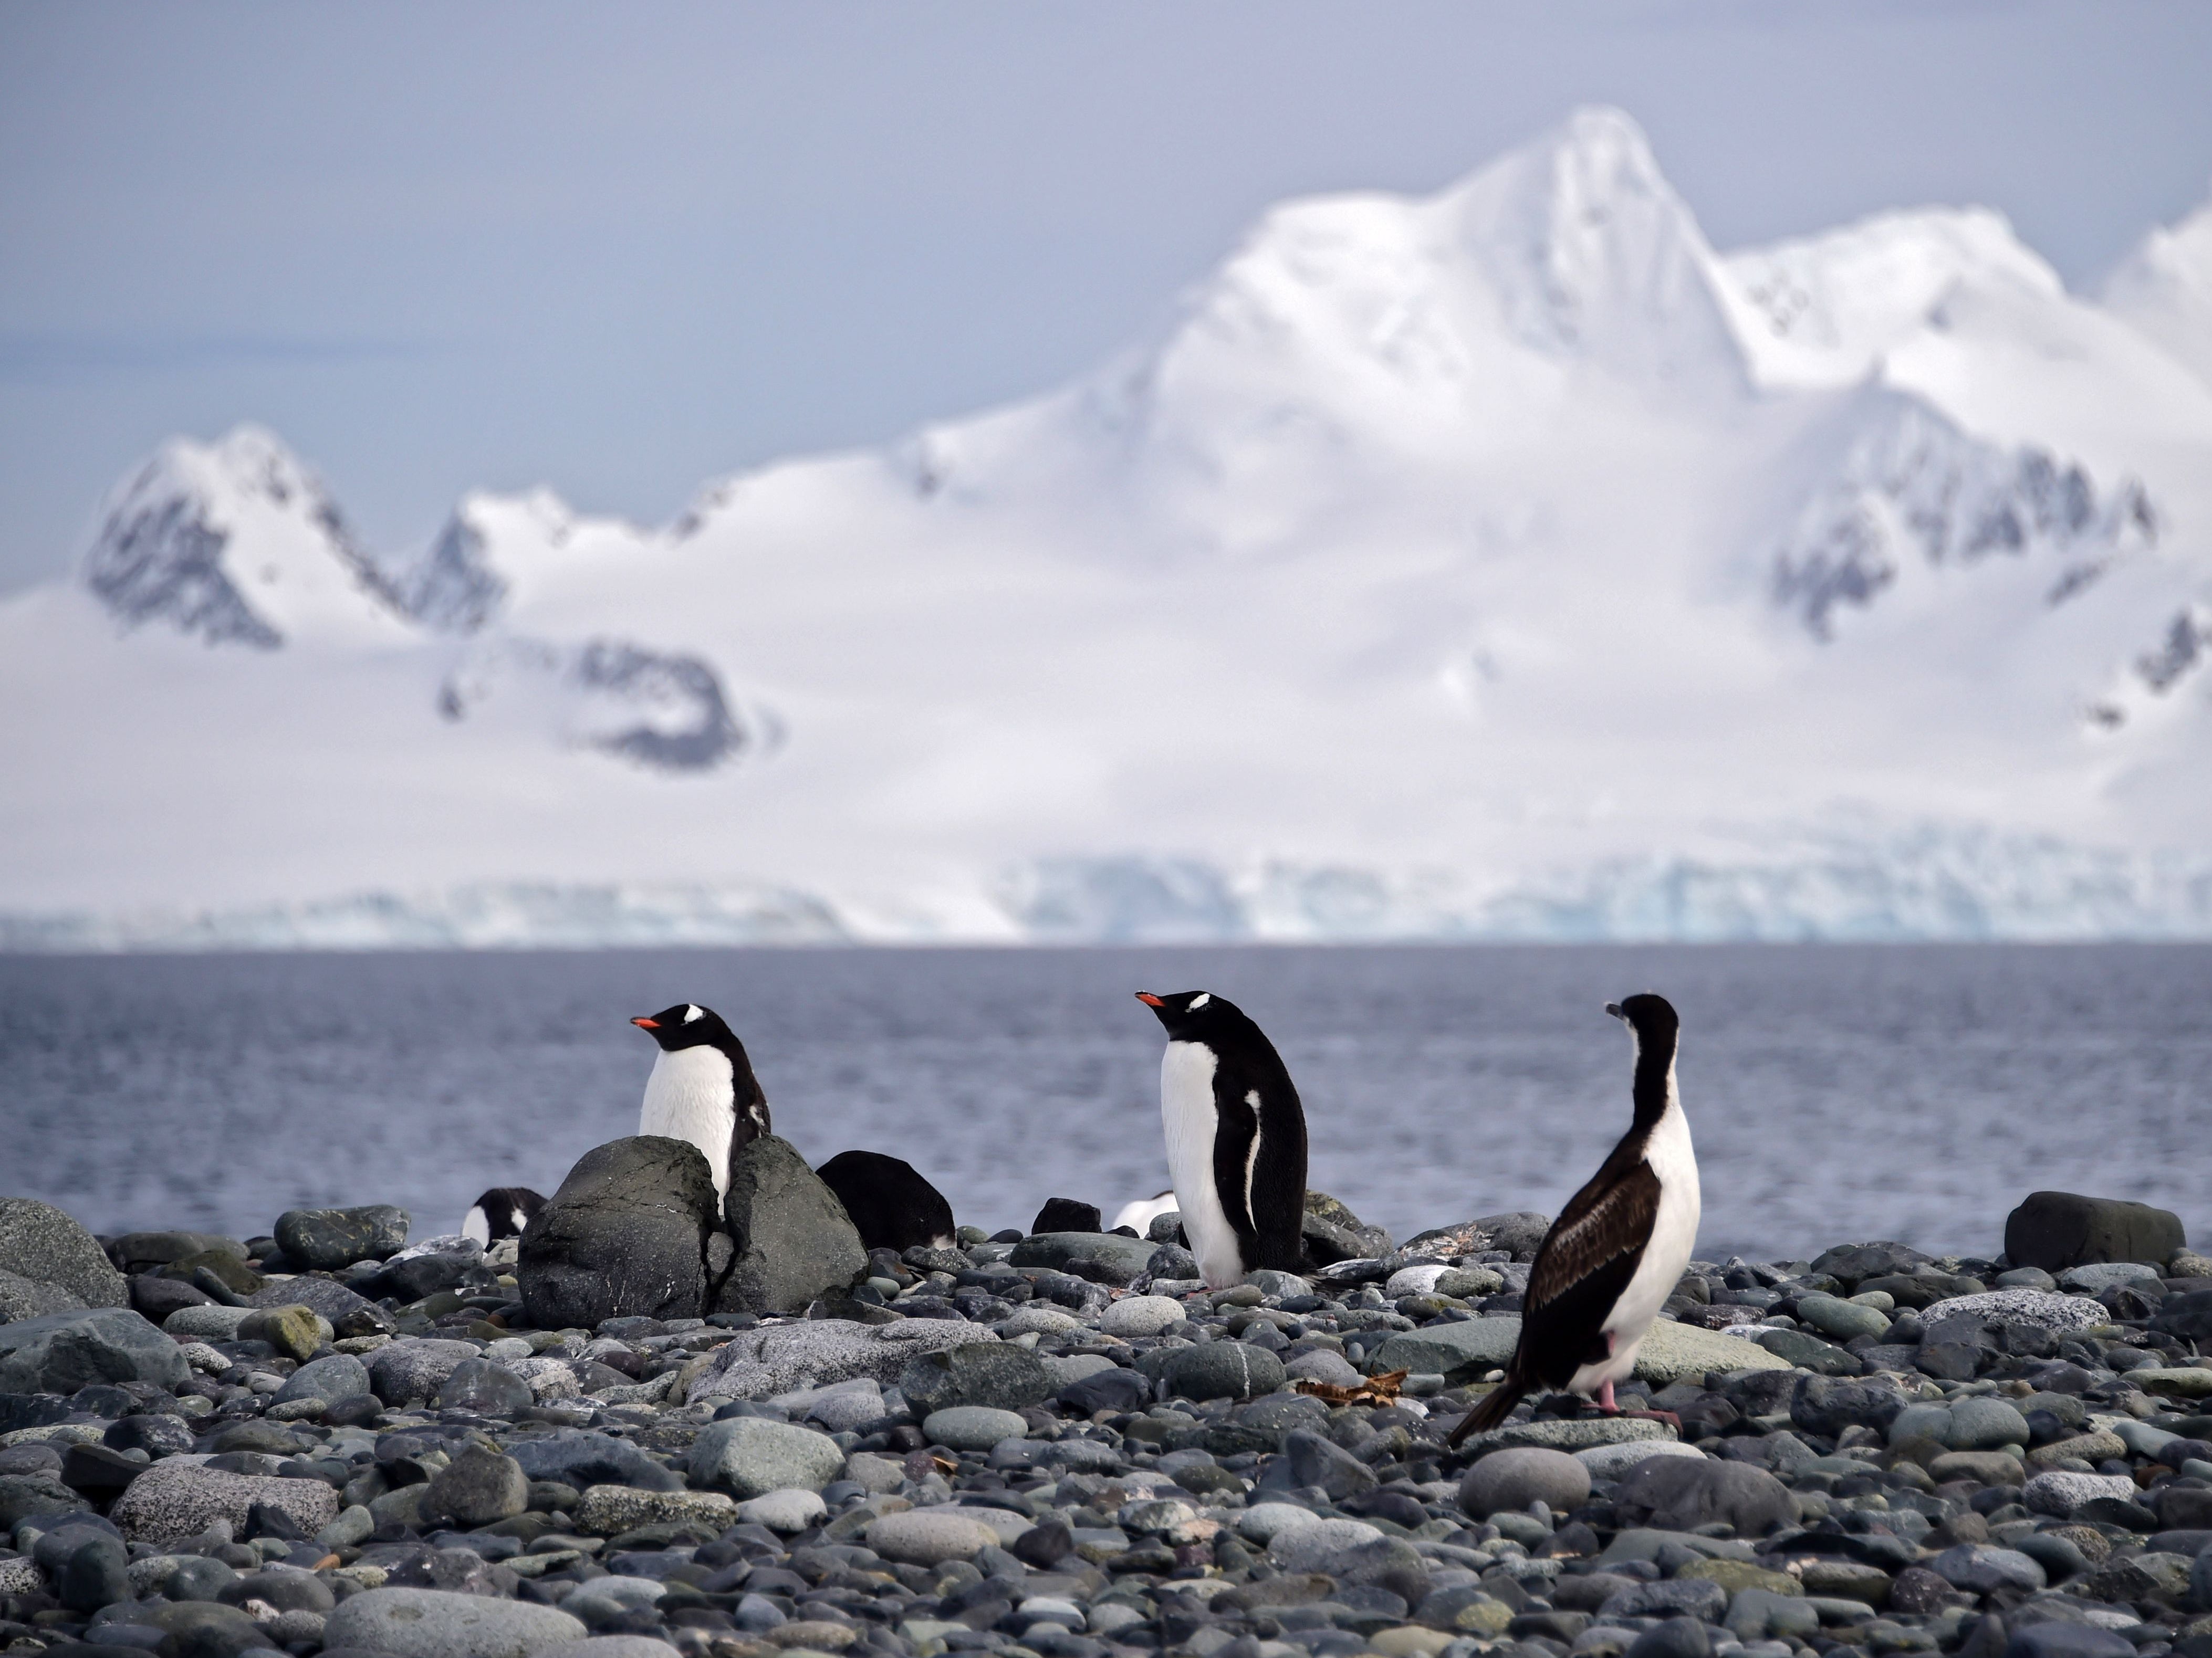 Gentoo penguins in Antarctica could be your new colleagues